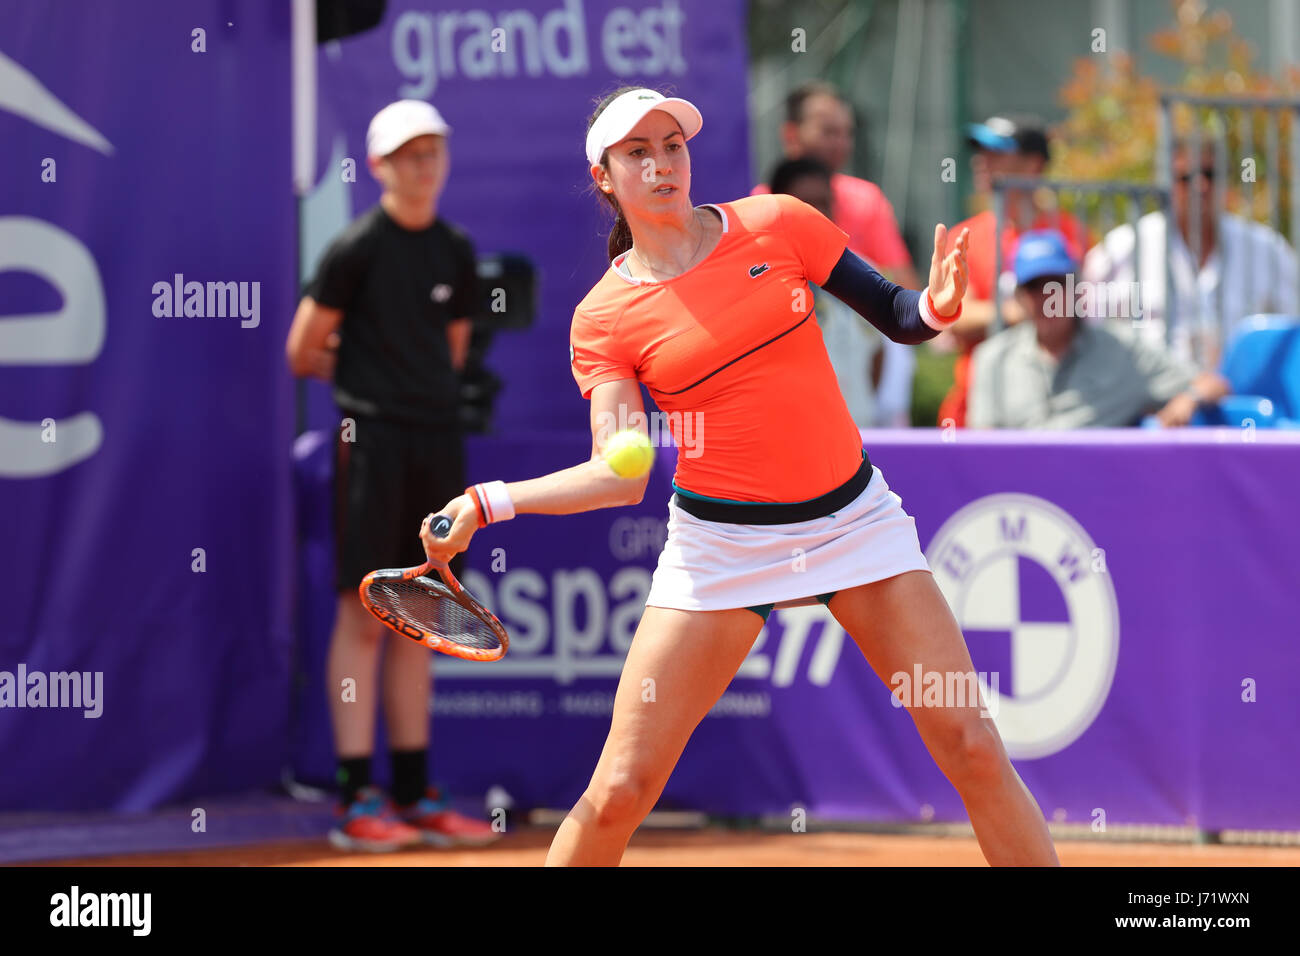 Strasbourg, France. 23rd May, 2017. American player Christina Mc Hale is in  action during her match in the 2nd round of the WTA tennis Internationaux  of Strasbourg vs Spanish tennis player Carla